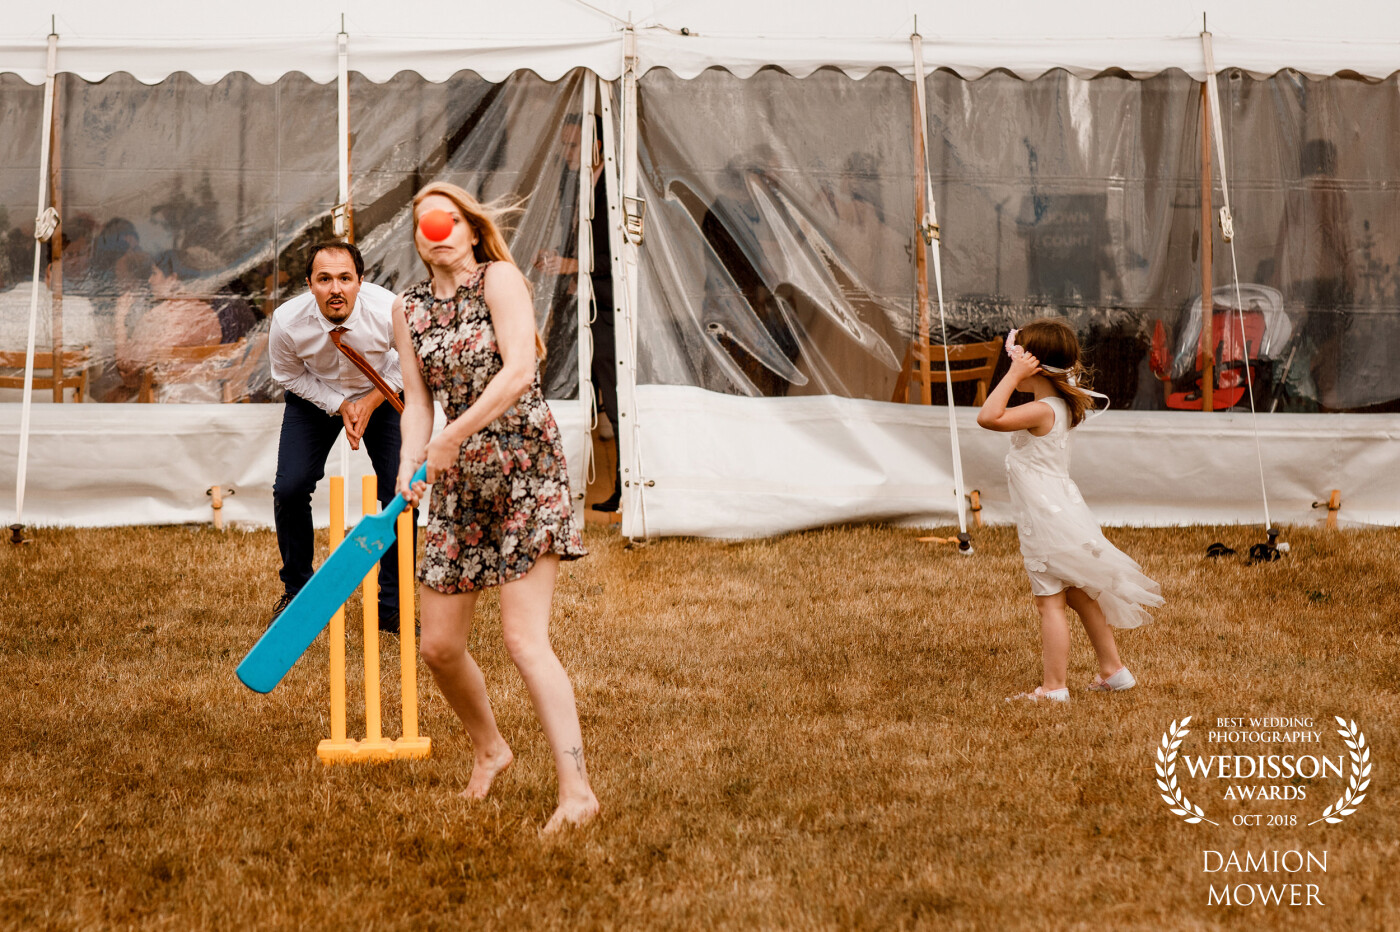 A fun moment at Alice and James's alternative wedding. A reception of Afternoon Tea and party games in the field. Guests camped overnight in the field.<br />
